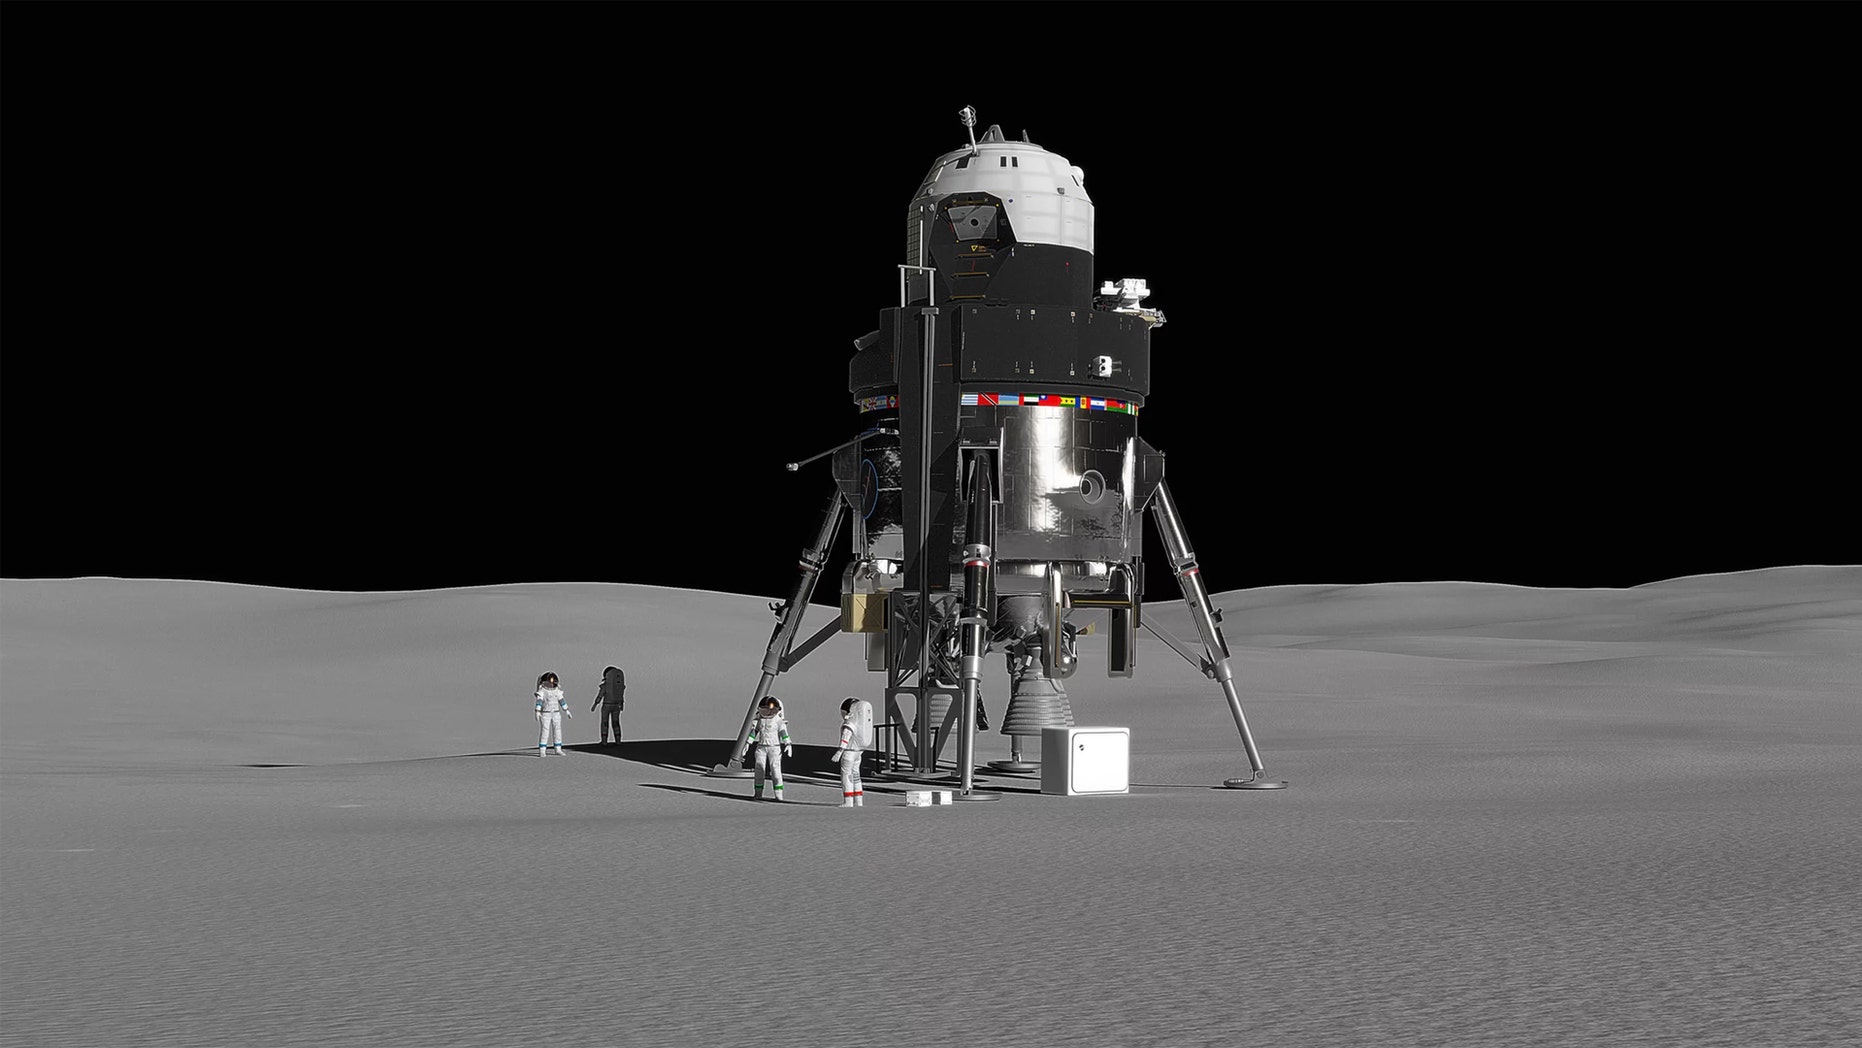 Lockheed Martin's huge Moon lander would allow astronauts to stay on